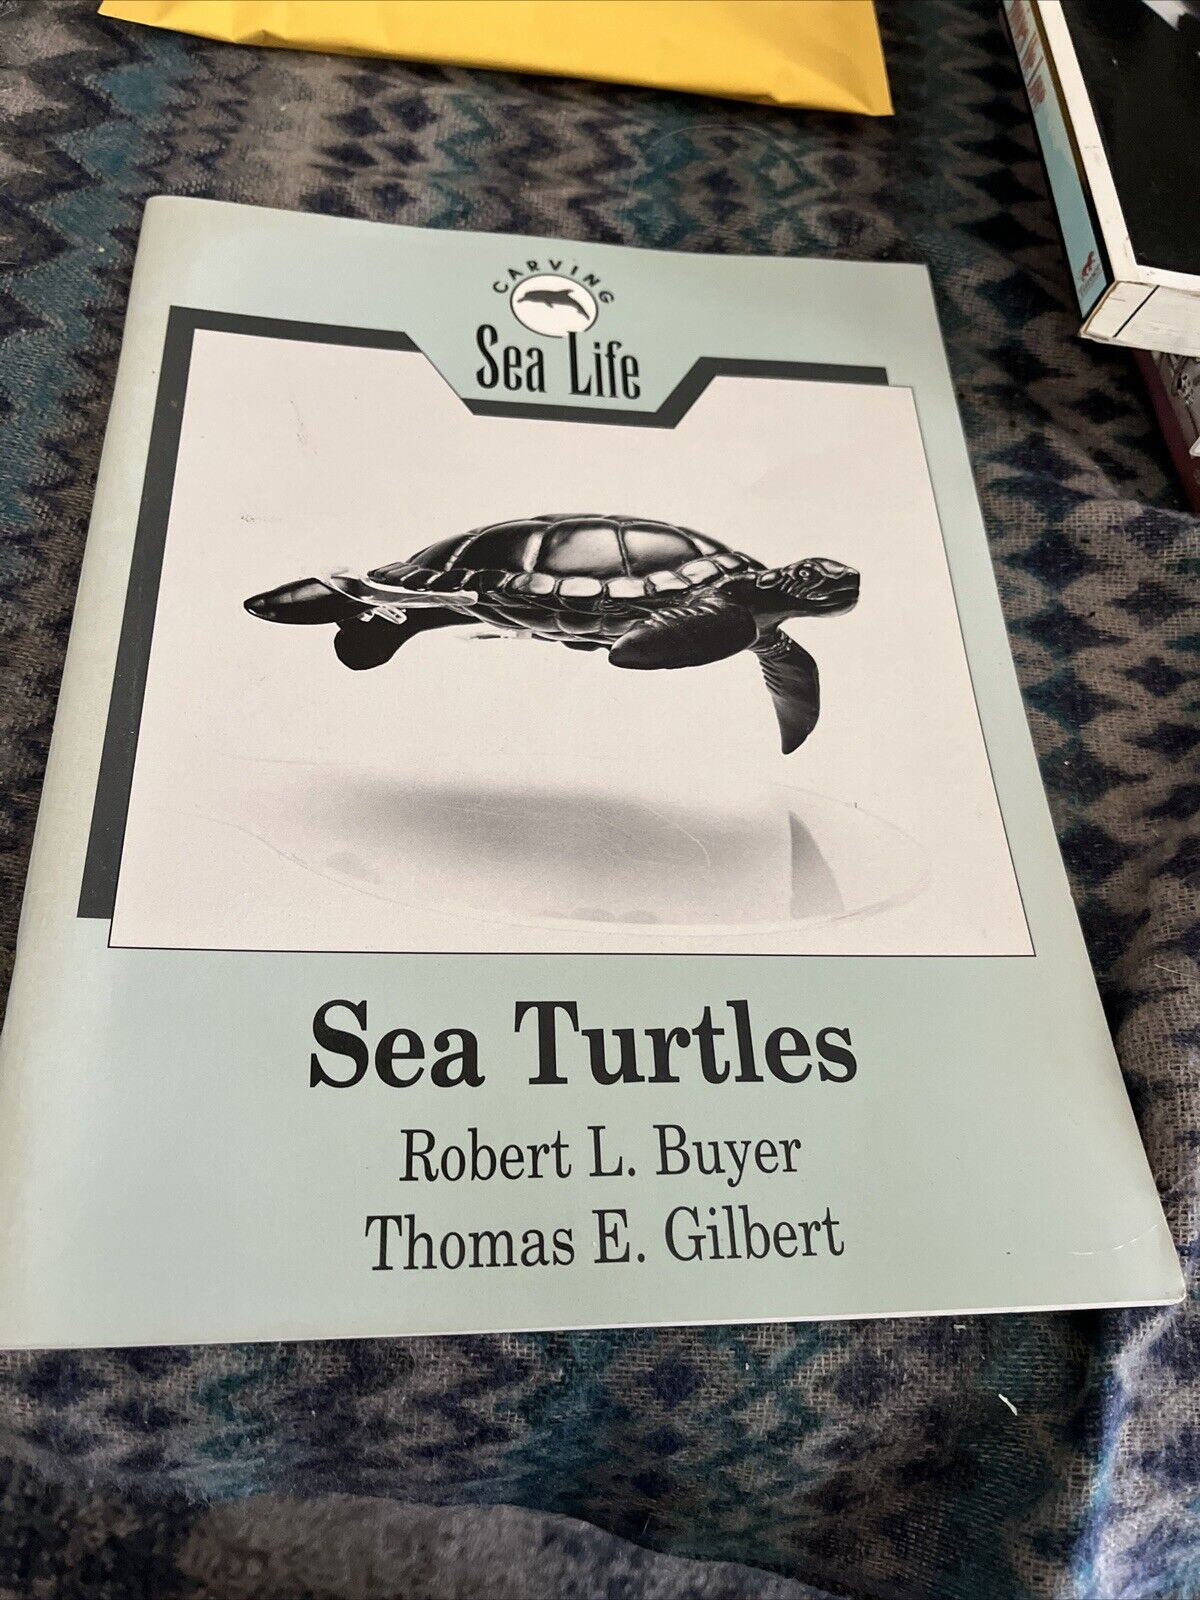 Sea Turtles - Ideal for those interested in collectables.